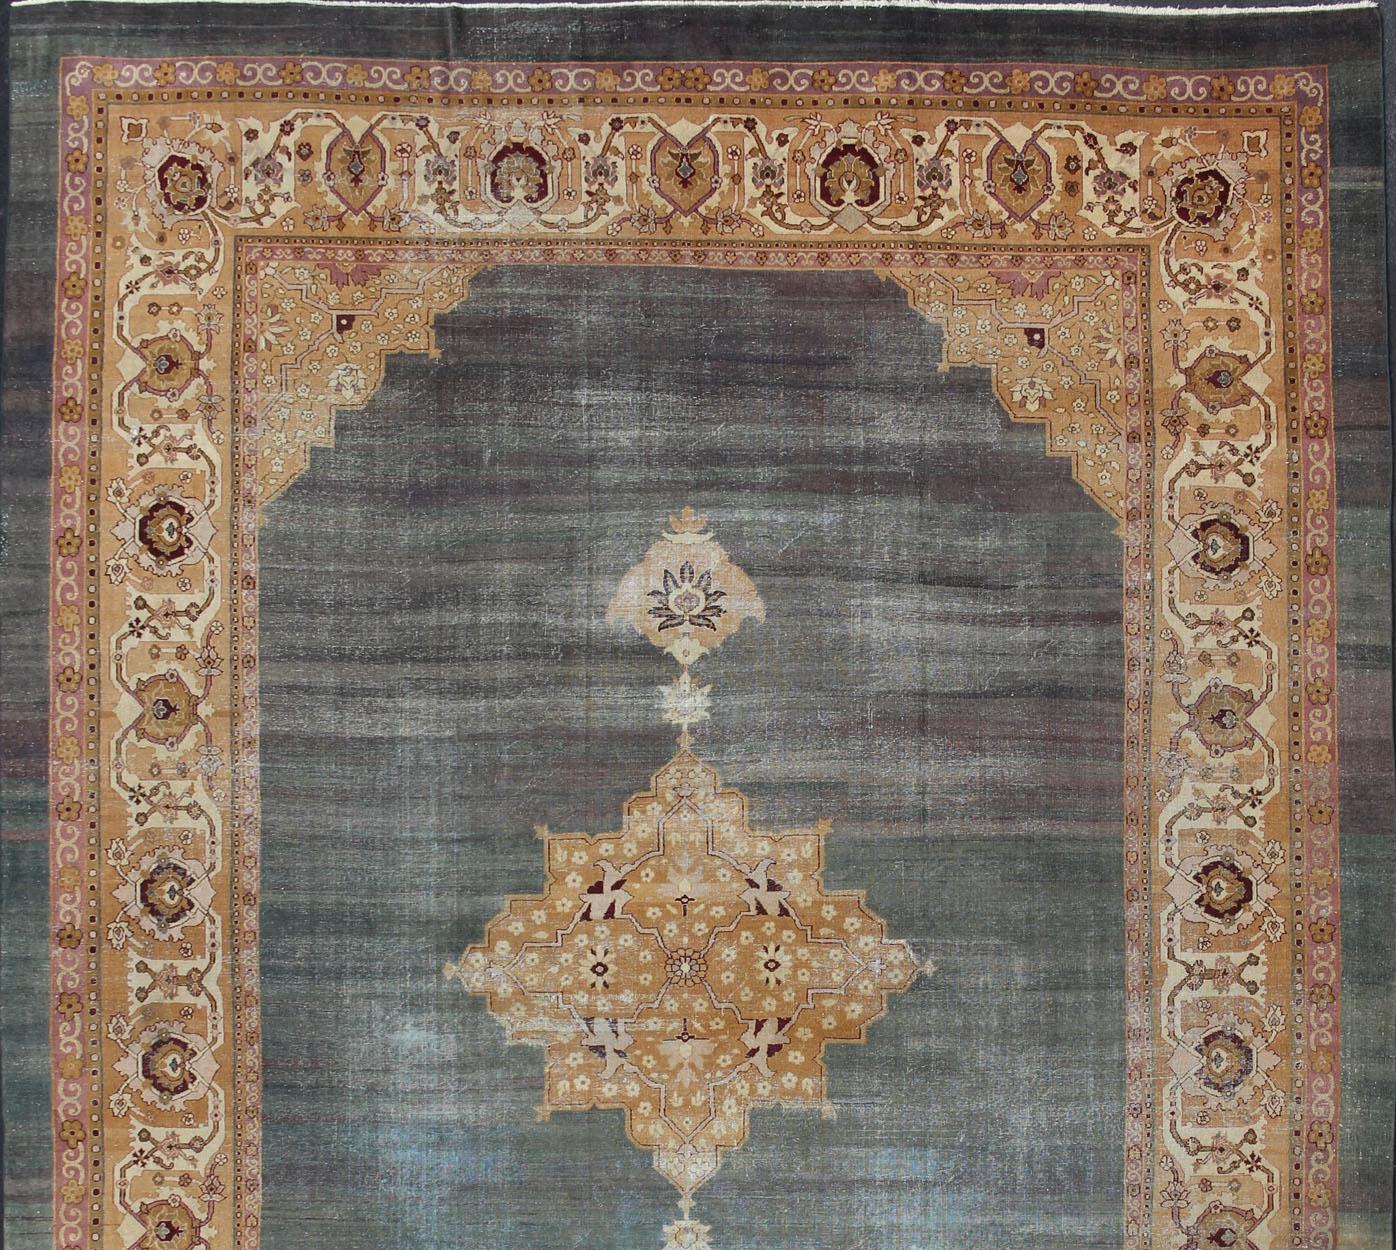 Antique Indian Agra rug intoxicating blue field and crown jewel medallion, antique crown jewel medallion, kwarugs / Keivan Woven Arts  / E-0907 /  country of origin / type: Iran / Agra, circa 1900 Antique Agra, antique Amritsar.
Measures: 12'11 x